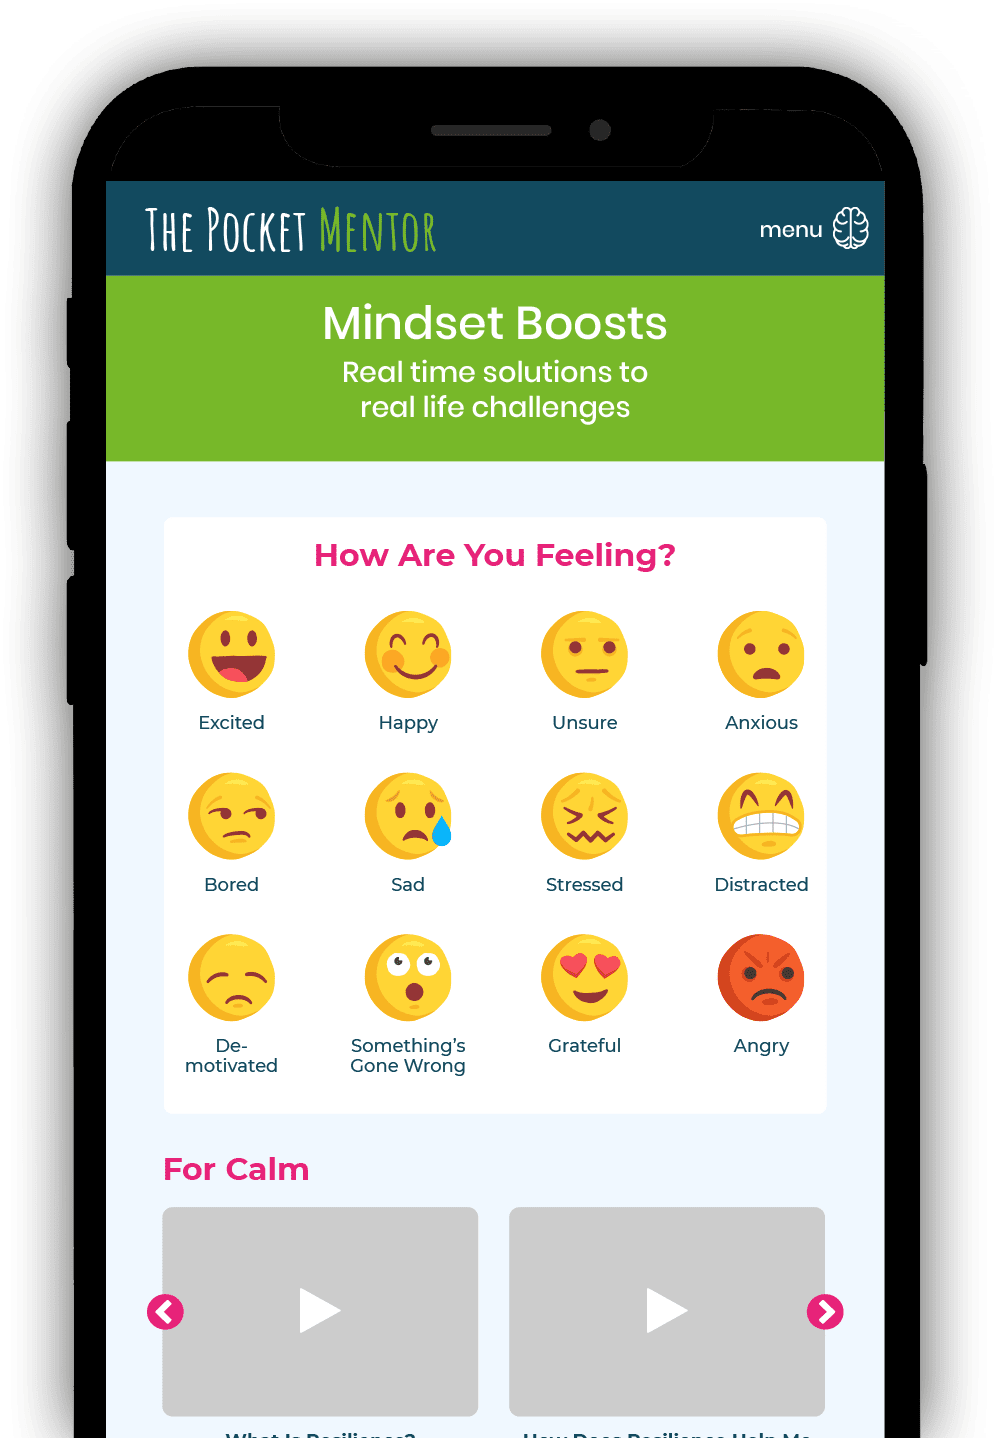 Use our Mindset Boosts anytime, giving you real time solutions to real life challenges